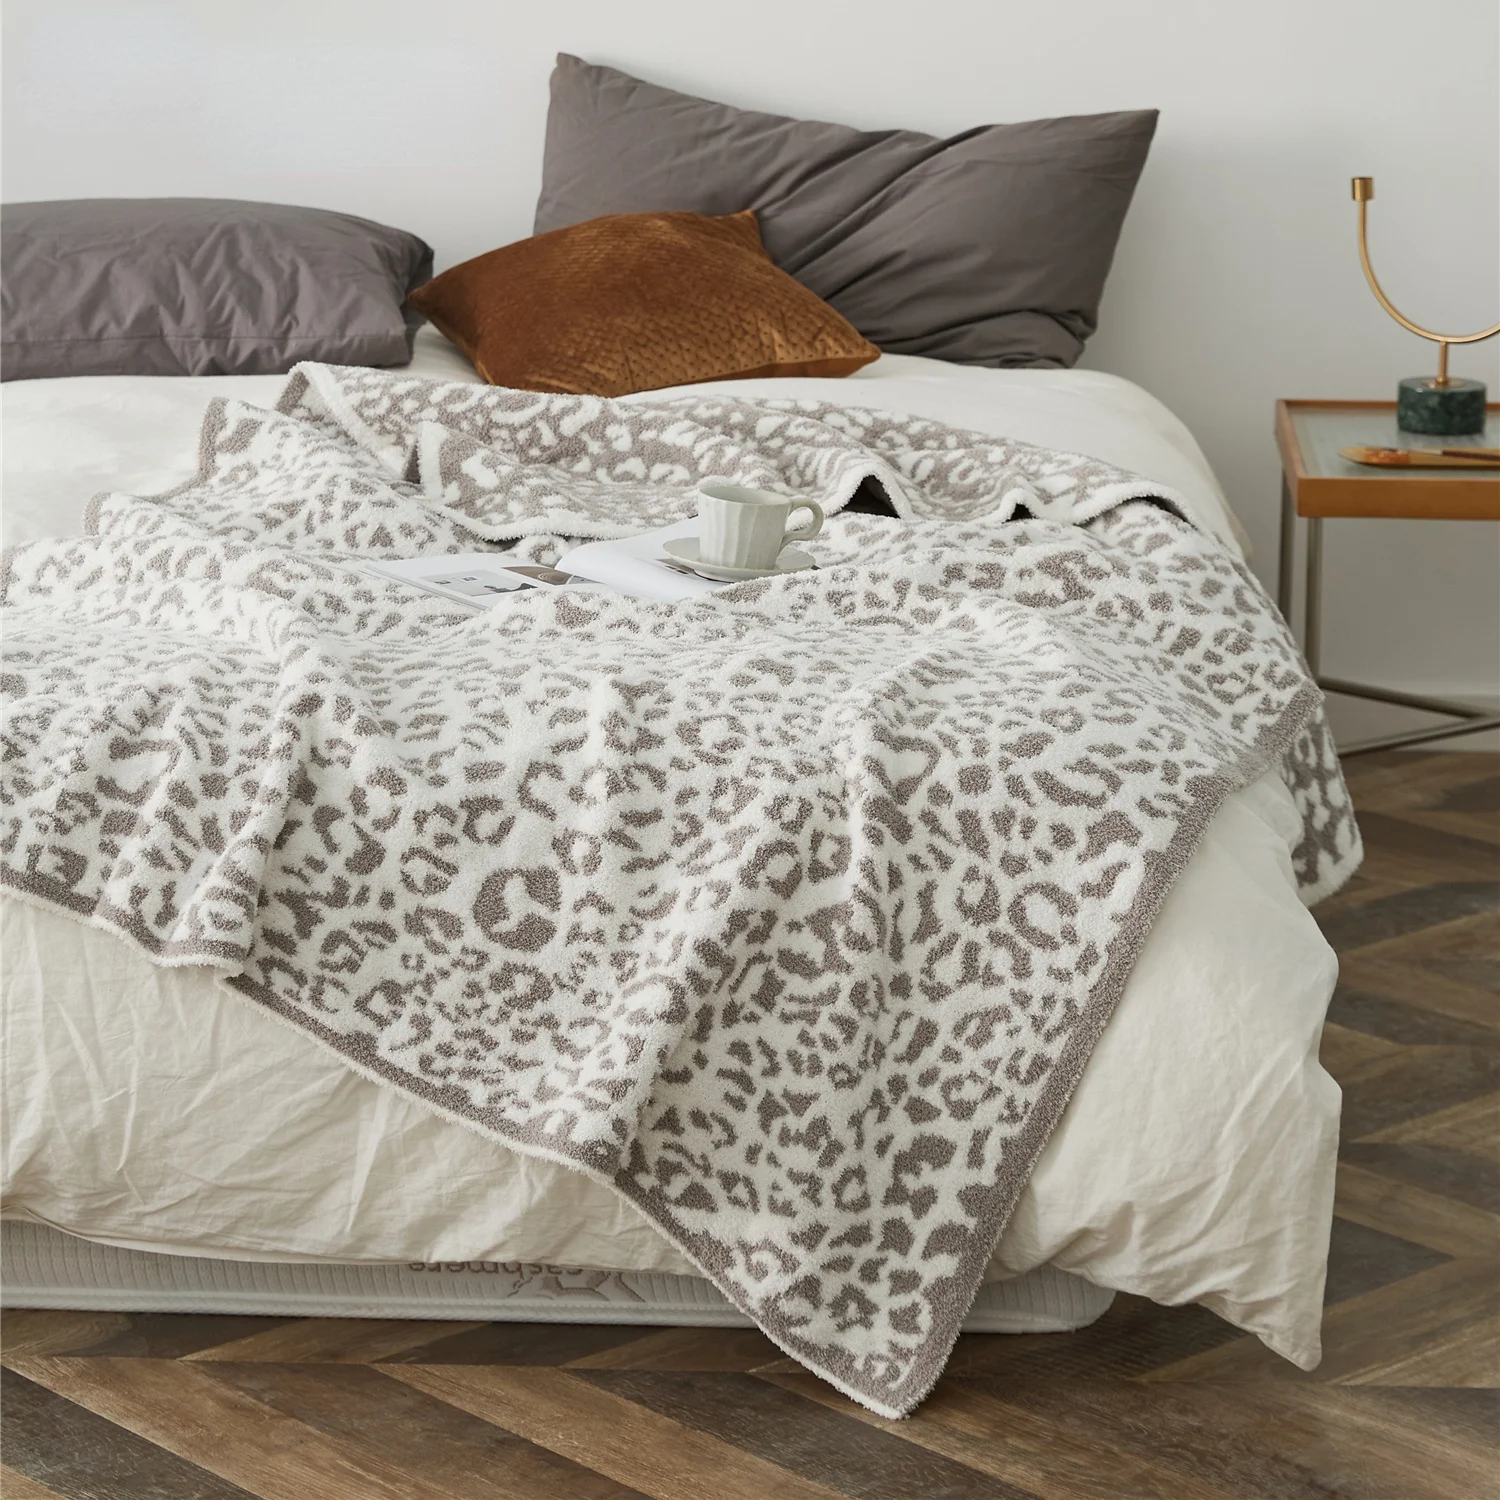 Delicate High-grade Knitted Leopard Print Blankets Winter Warm Faux Fur Microfiber Plaid Bedspread Fluffy Adult Blanket Throw